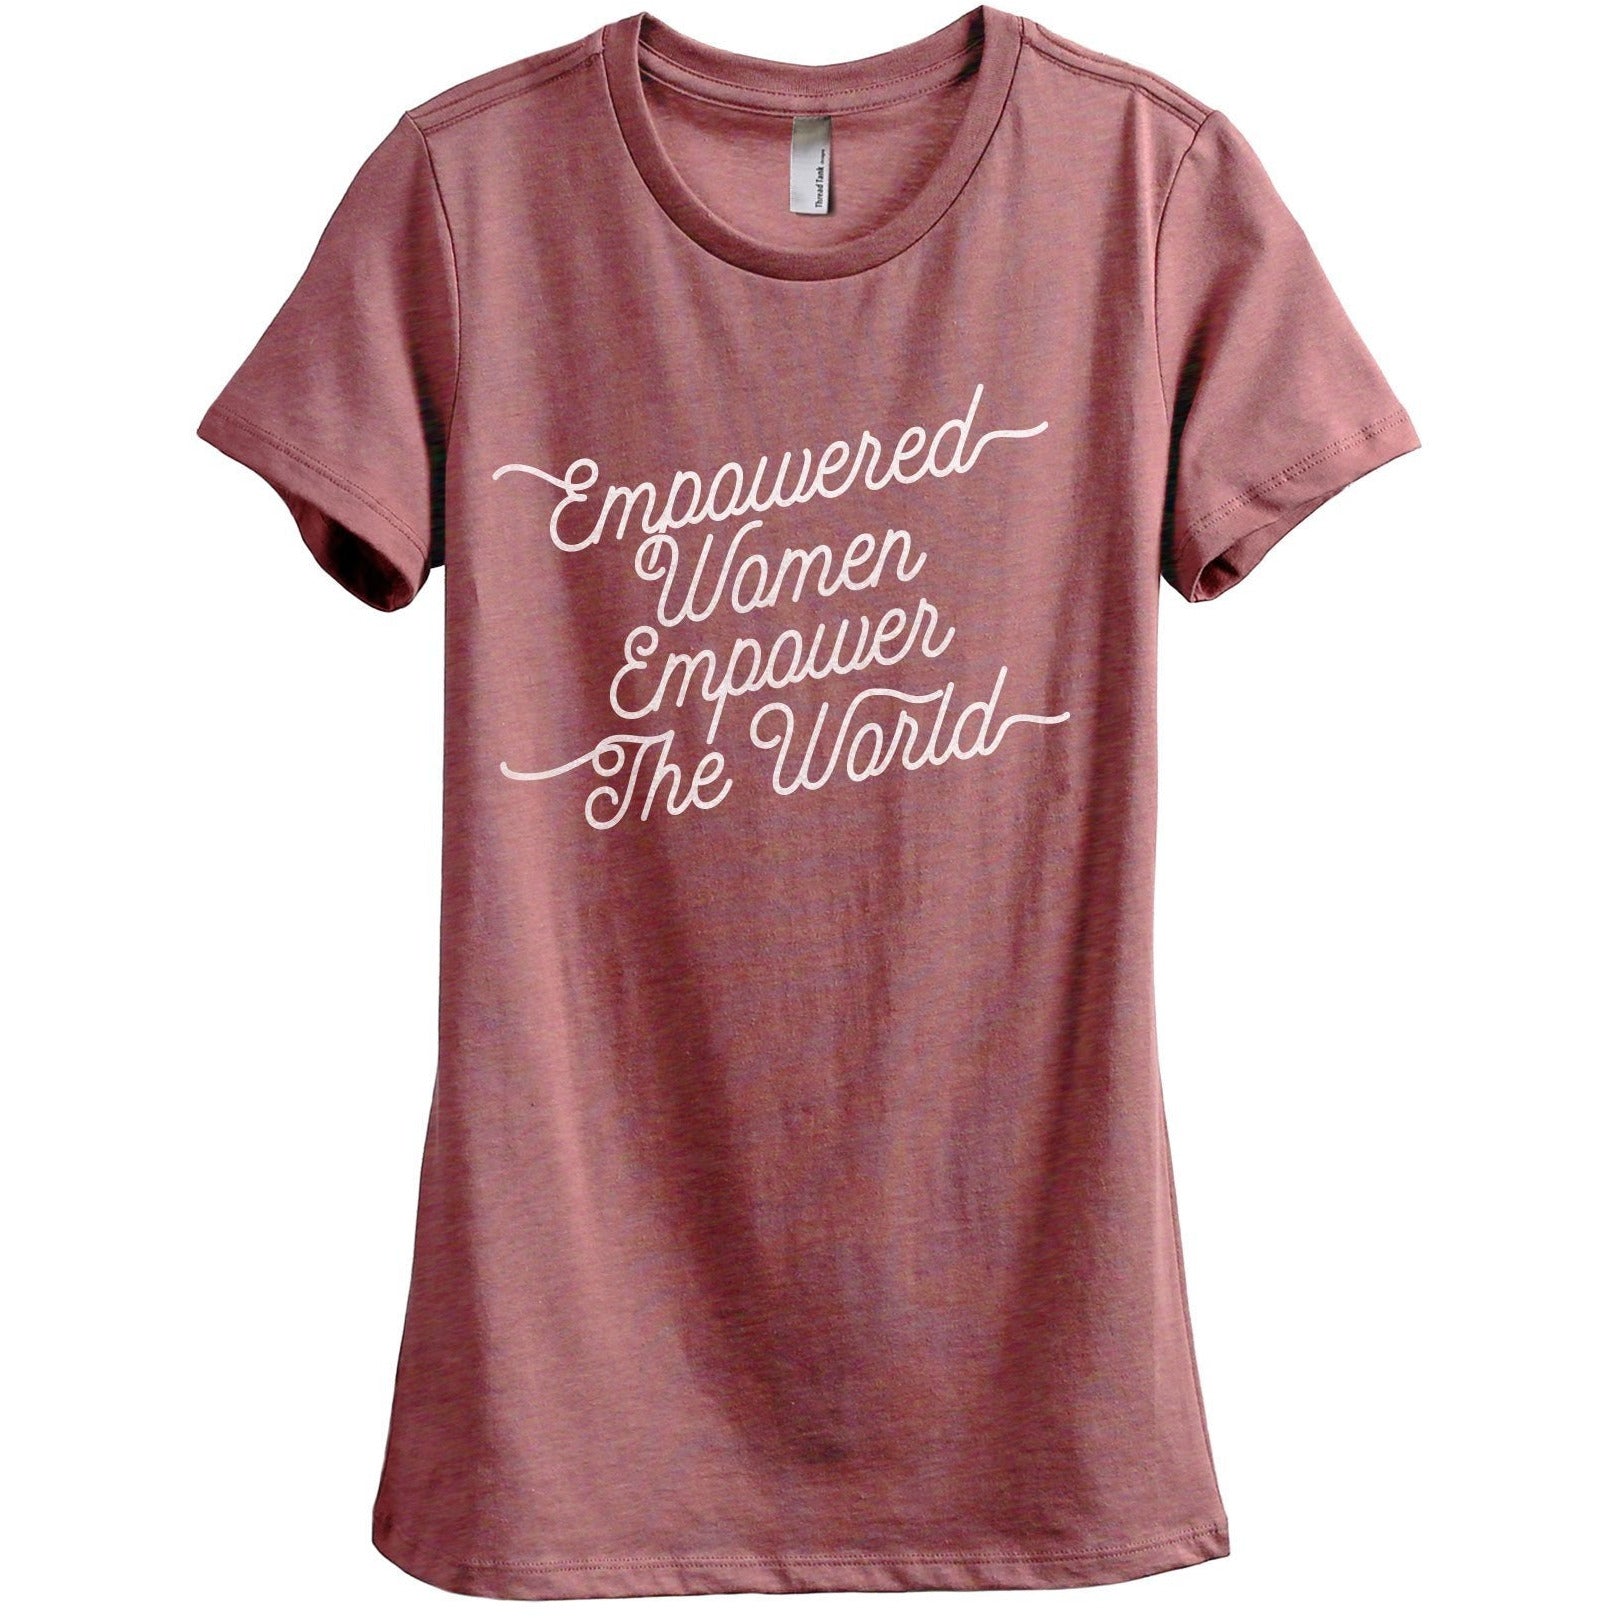 Empowered Women Empower The World Women's Relaxed Crewneck T-Shirt Top Tee Heather Rouge